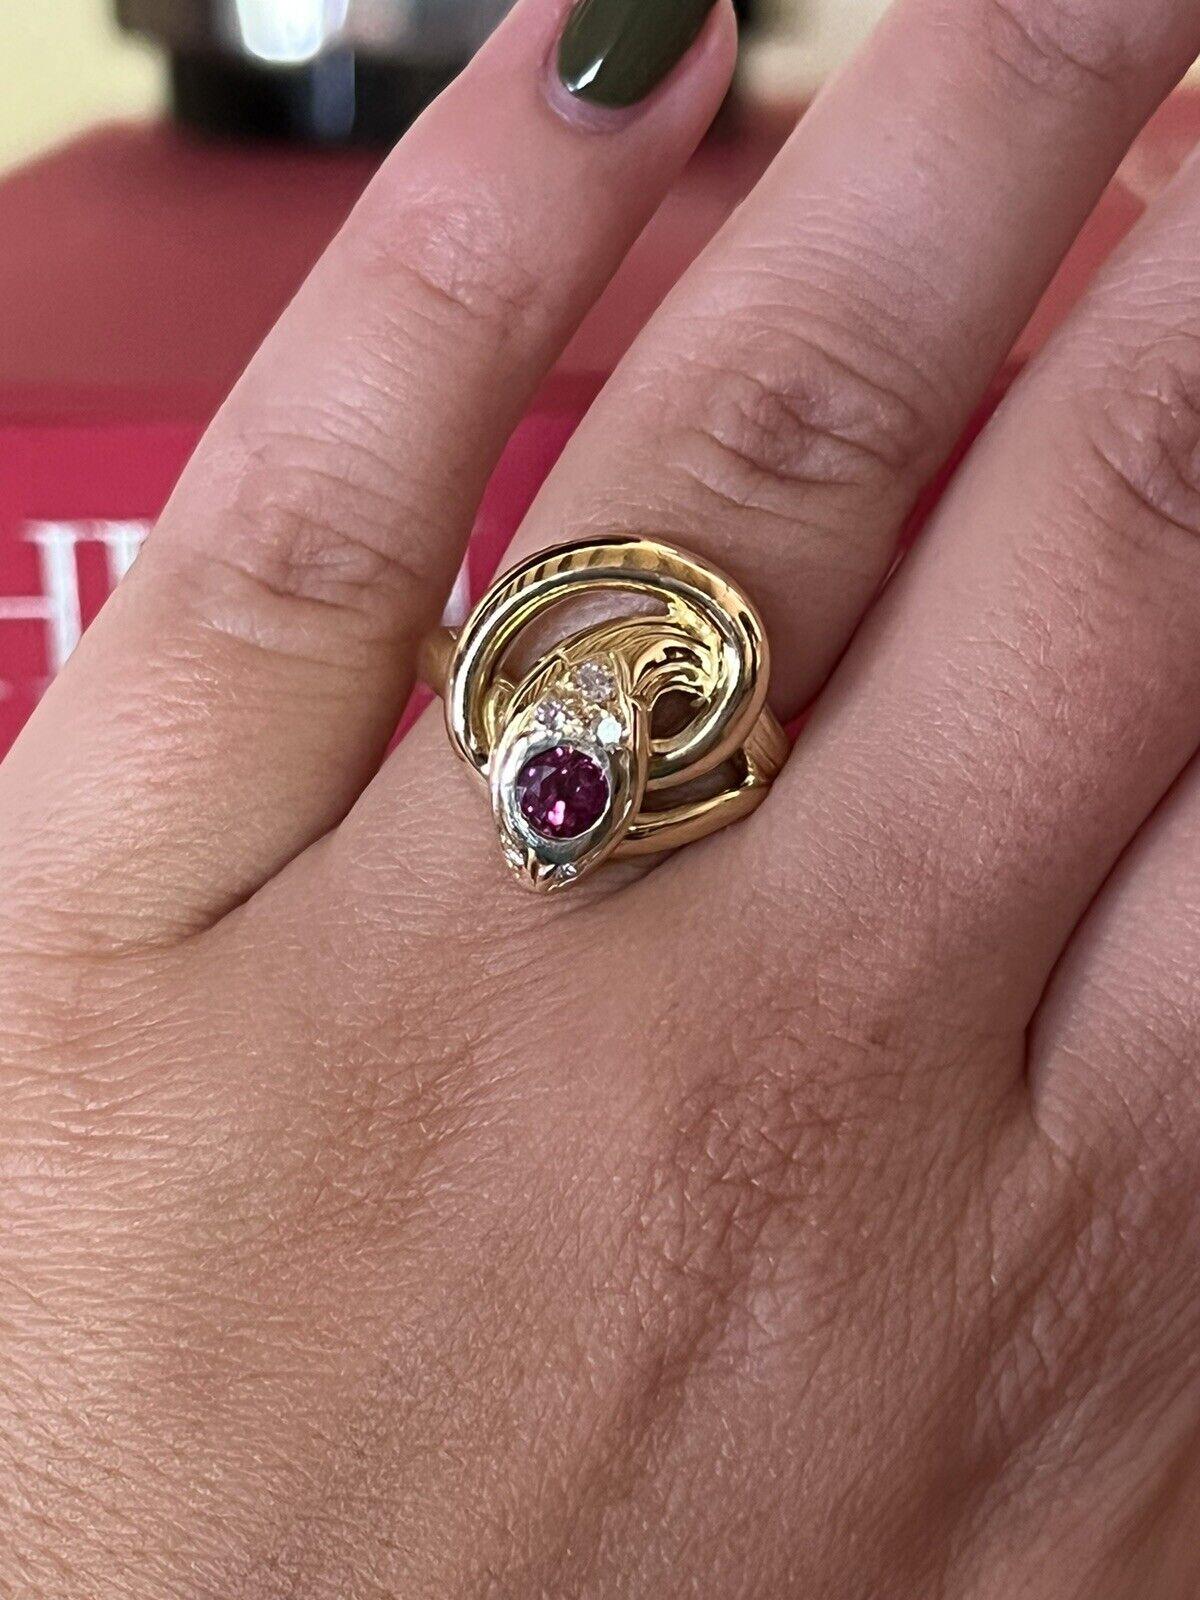 Fred Paris 18k Yellow Gold, Diamond & Burma Ruby Snake Ring Vintage Fully Hallmarked

Here is your chance to purchase a beautiful and highly collectible designer ring.  Truly a great piece at a great price! 

The weight is 10.5 grams.  The ring size